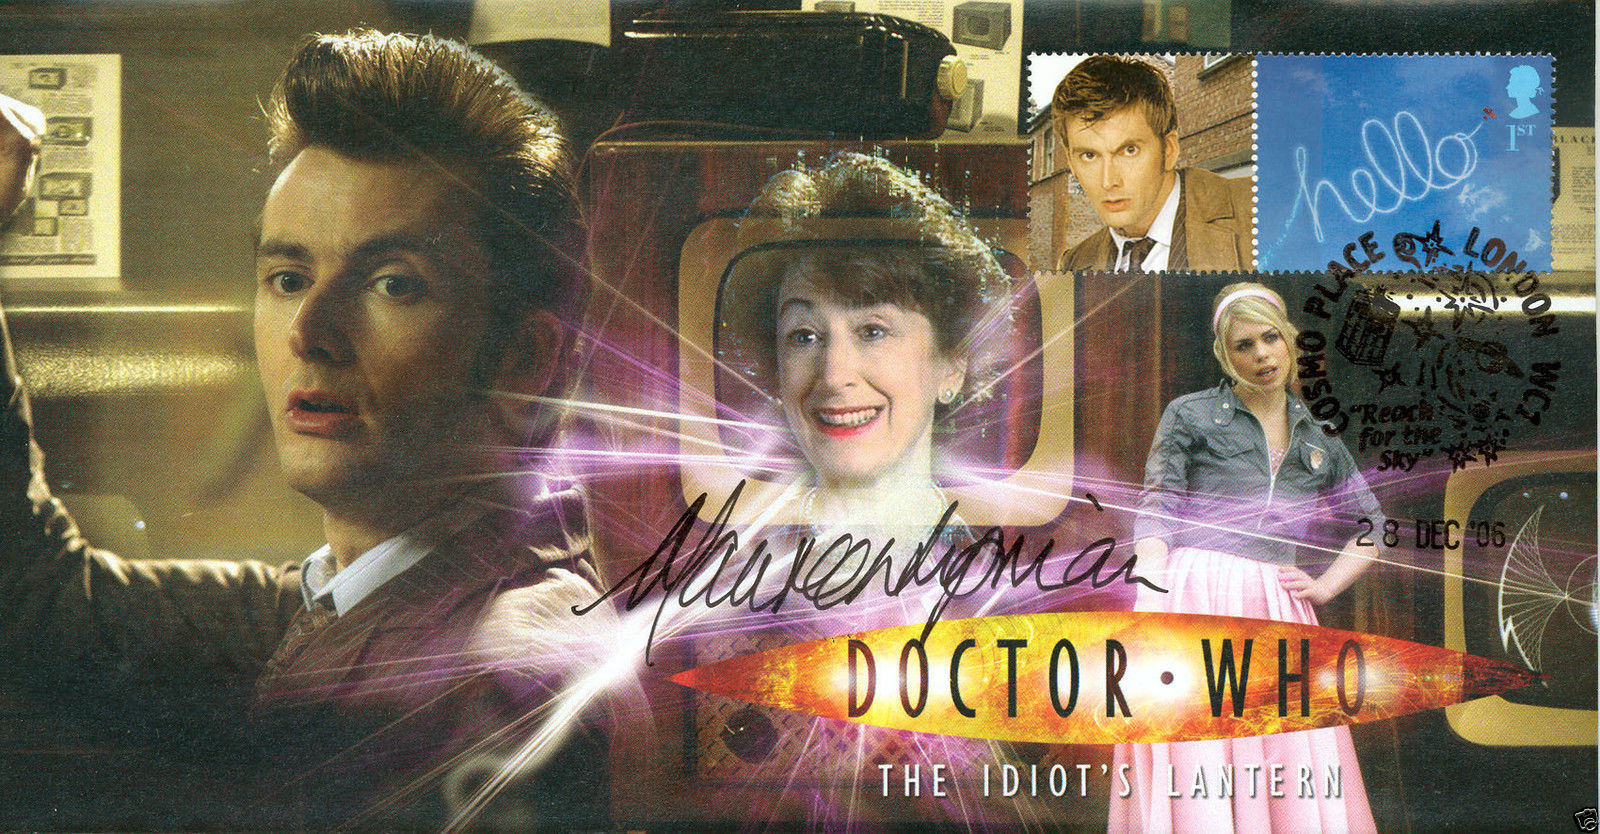 Doctor Who 2006 Series 2 Episode 7 The Idiot's Lantern Collectible Stamp Cover Signed by MAUREEN LIPMAN